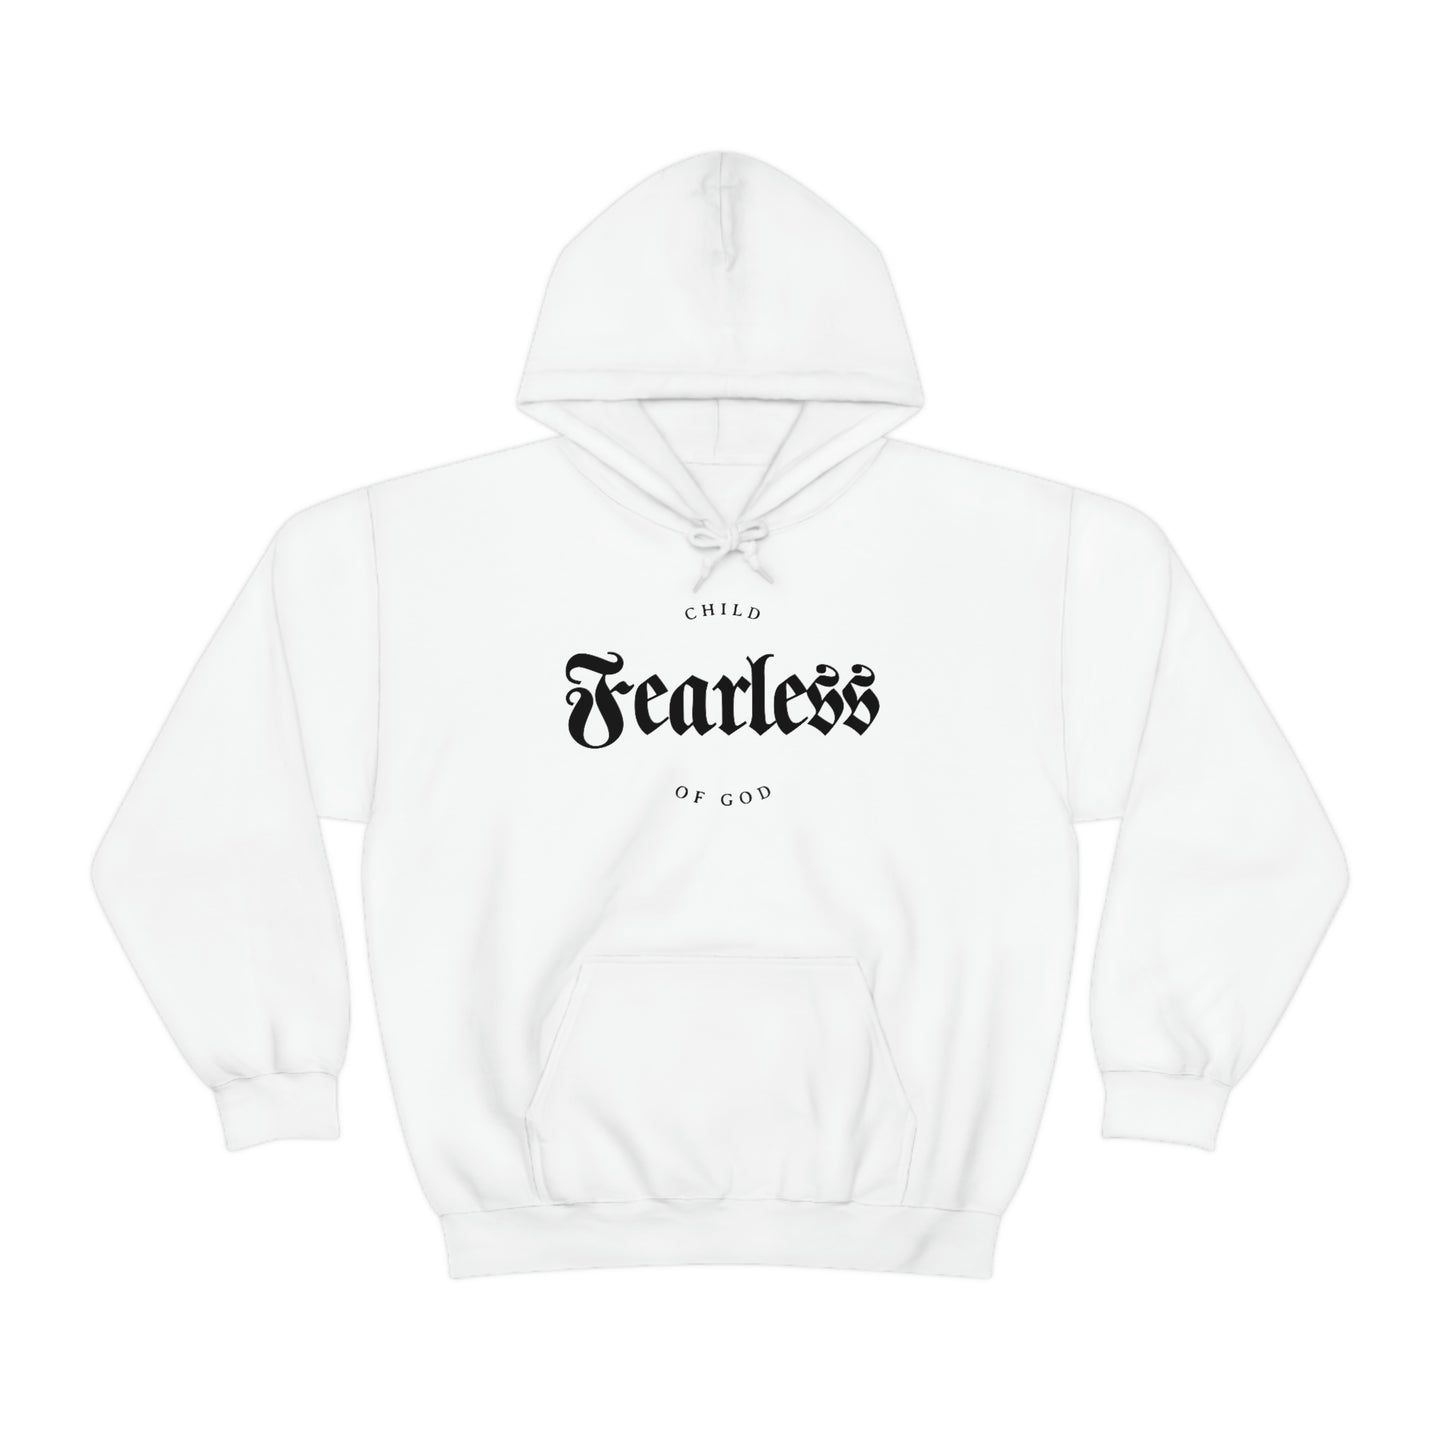 Fearless child of God Womens Hoodie